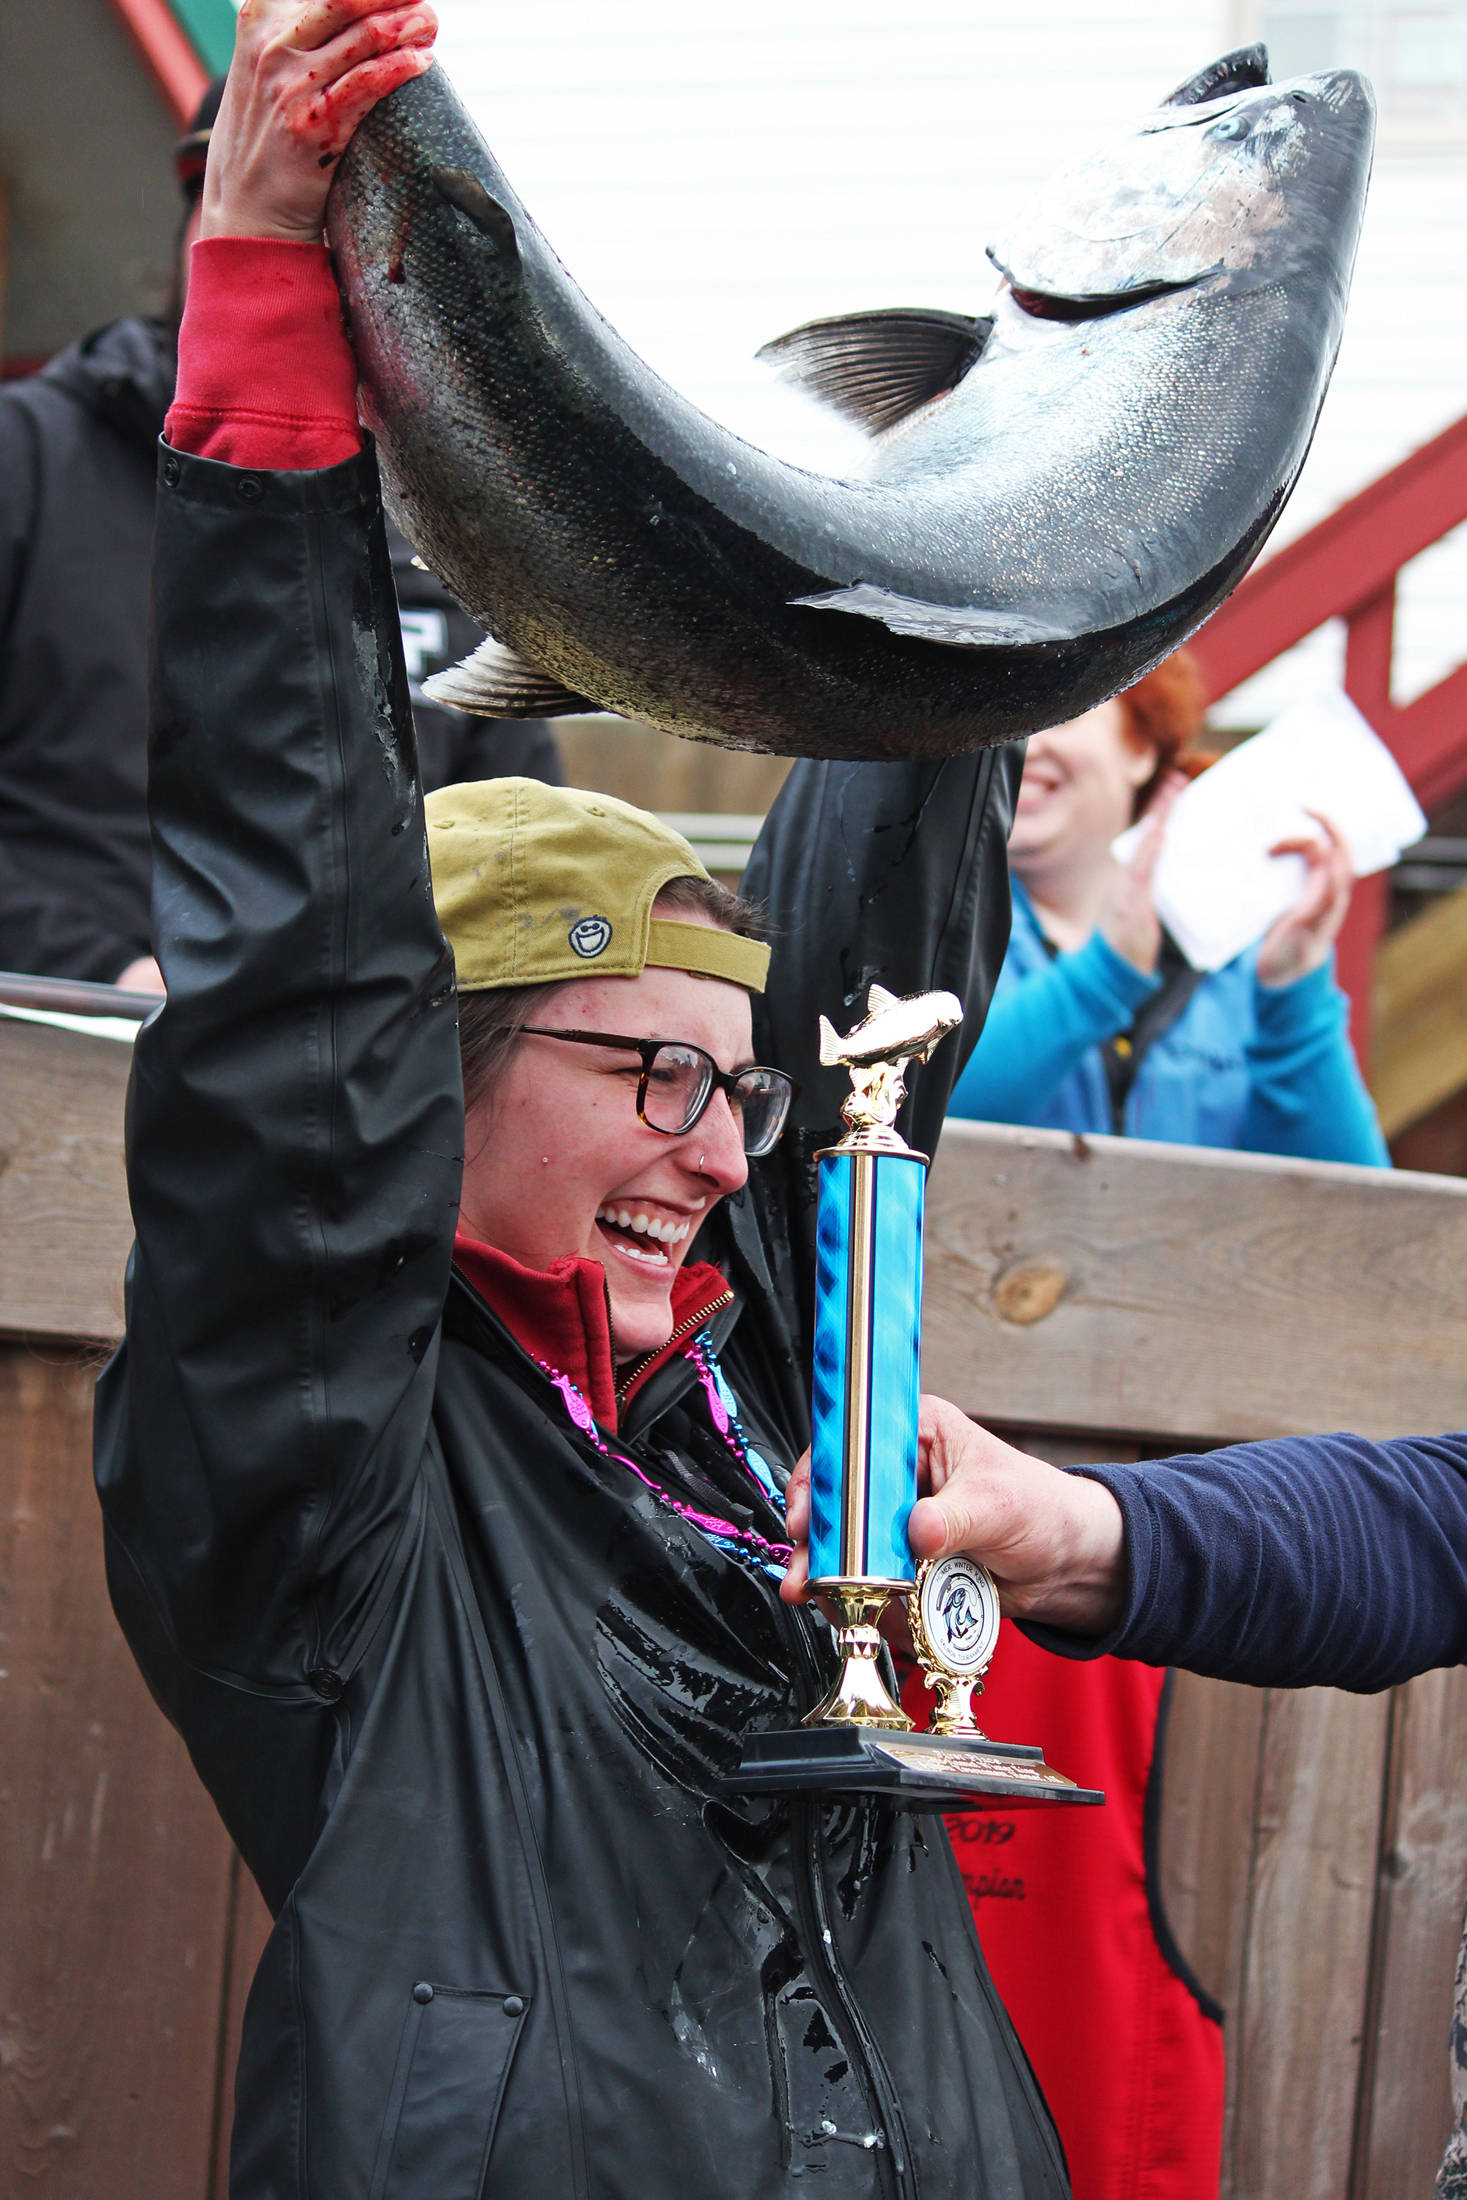 Shayna Perry, of Eagle River, holds up her winning 26.7-pound white salmon at the award ceremony following the Homer Winter King Salmon Tournament on March 23, 2019 at Coal Point Seafoods in Homer, Alaska. Perry, who also won the award for largest white salmon, was the first woman to win the annual tournament. (Photo by Megan Pacer/Homer News)
Shayna Perry, of Eagle River, holds up her winning 26.7-pound white salmon at the award ceremony following the Homer Winter King Salmon Tournament on March 23, 2019 at Coal Point Seafoods in Homer, Alaska. Perry, who also won the award for largest white salmon, was the first woman to win the annual tournament. (Photo by Megan Pacer/Homer News)